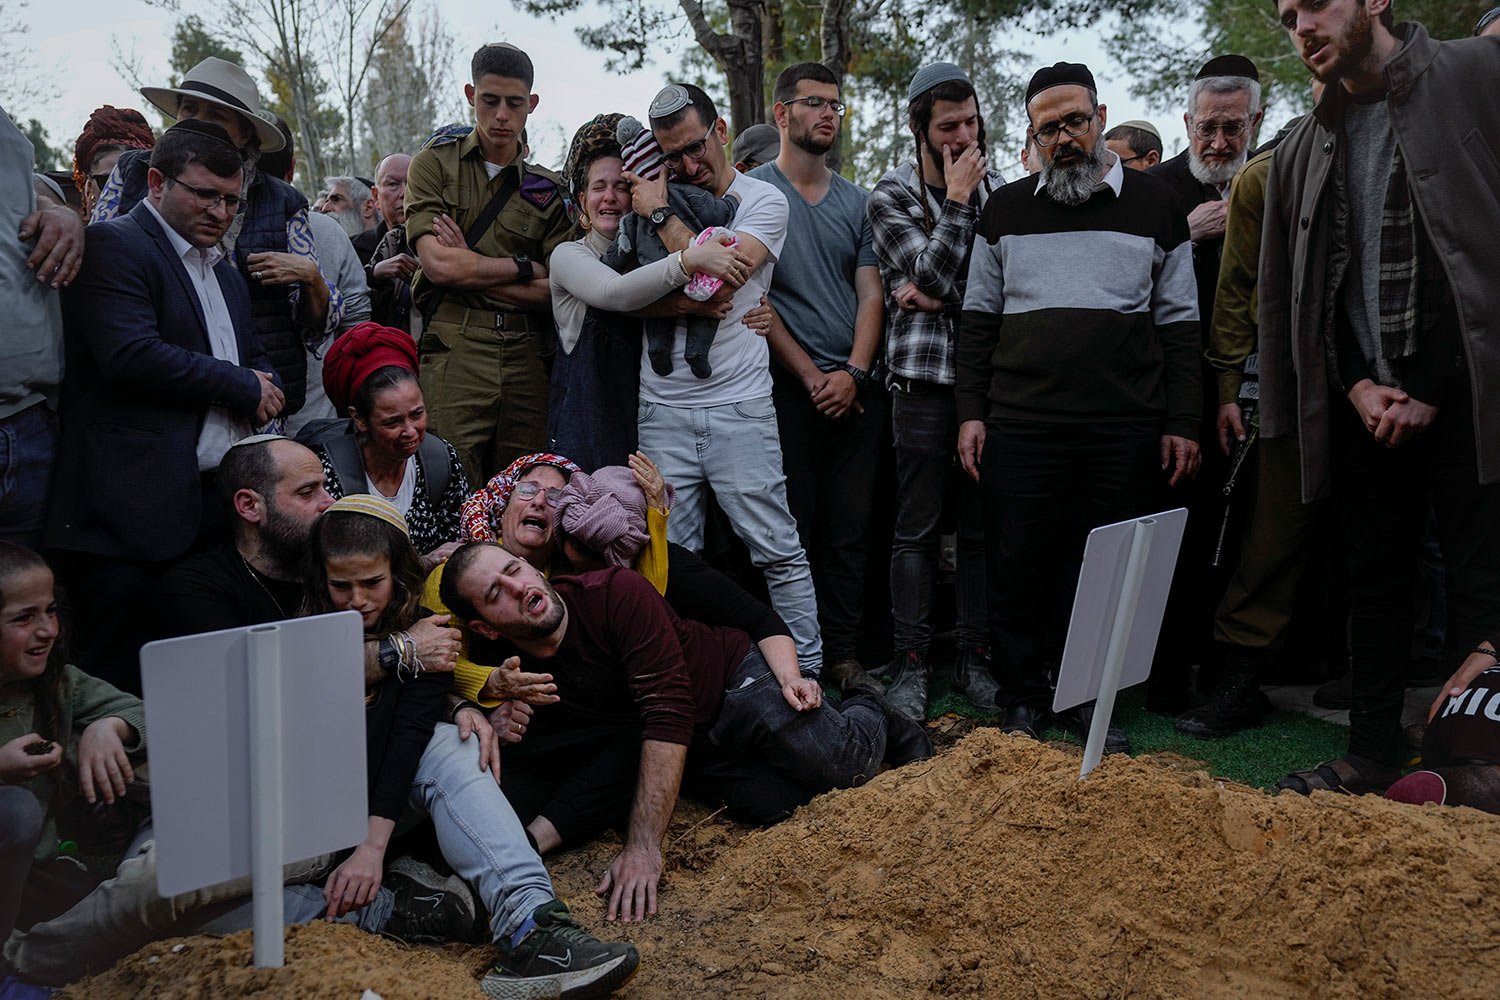  Family members and friends of Hillel Yaniv, 21, and Yagel Yaniv, 19, mourn over their graves during their funeral at Israel's national cemetery in Jerusalem, Monday, Feb. 27, 2023. (AP Photo/Ohad Zwigenberg) 